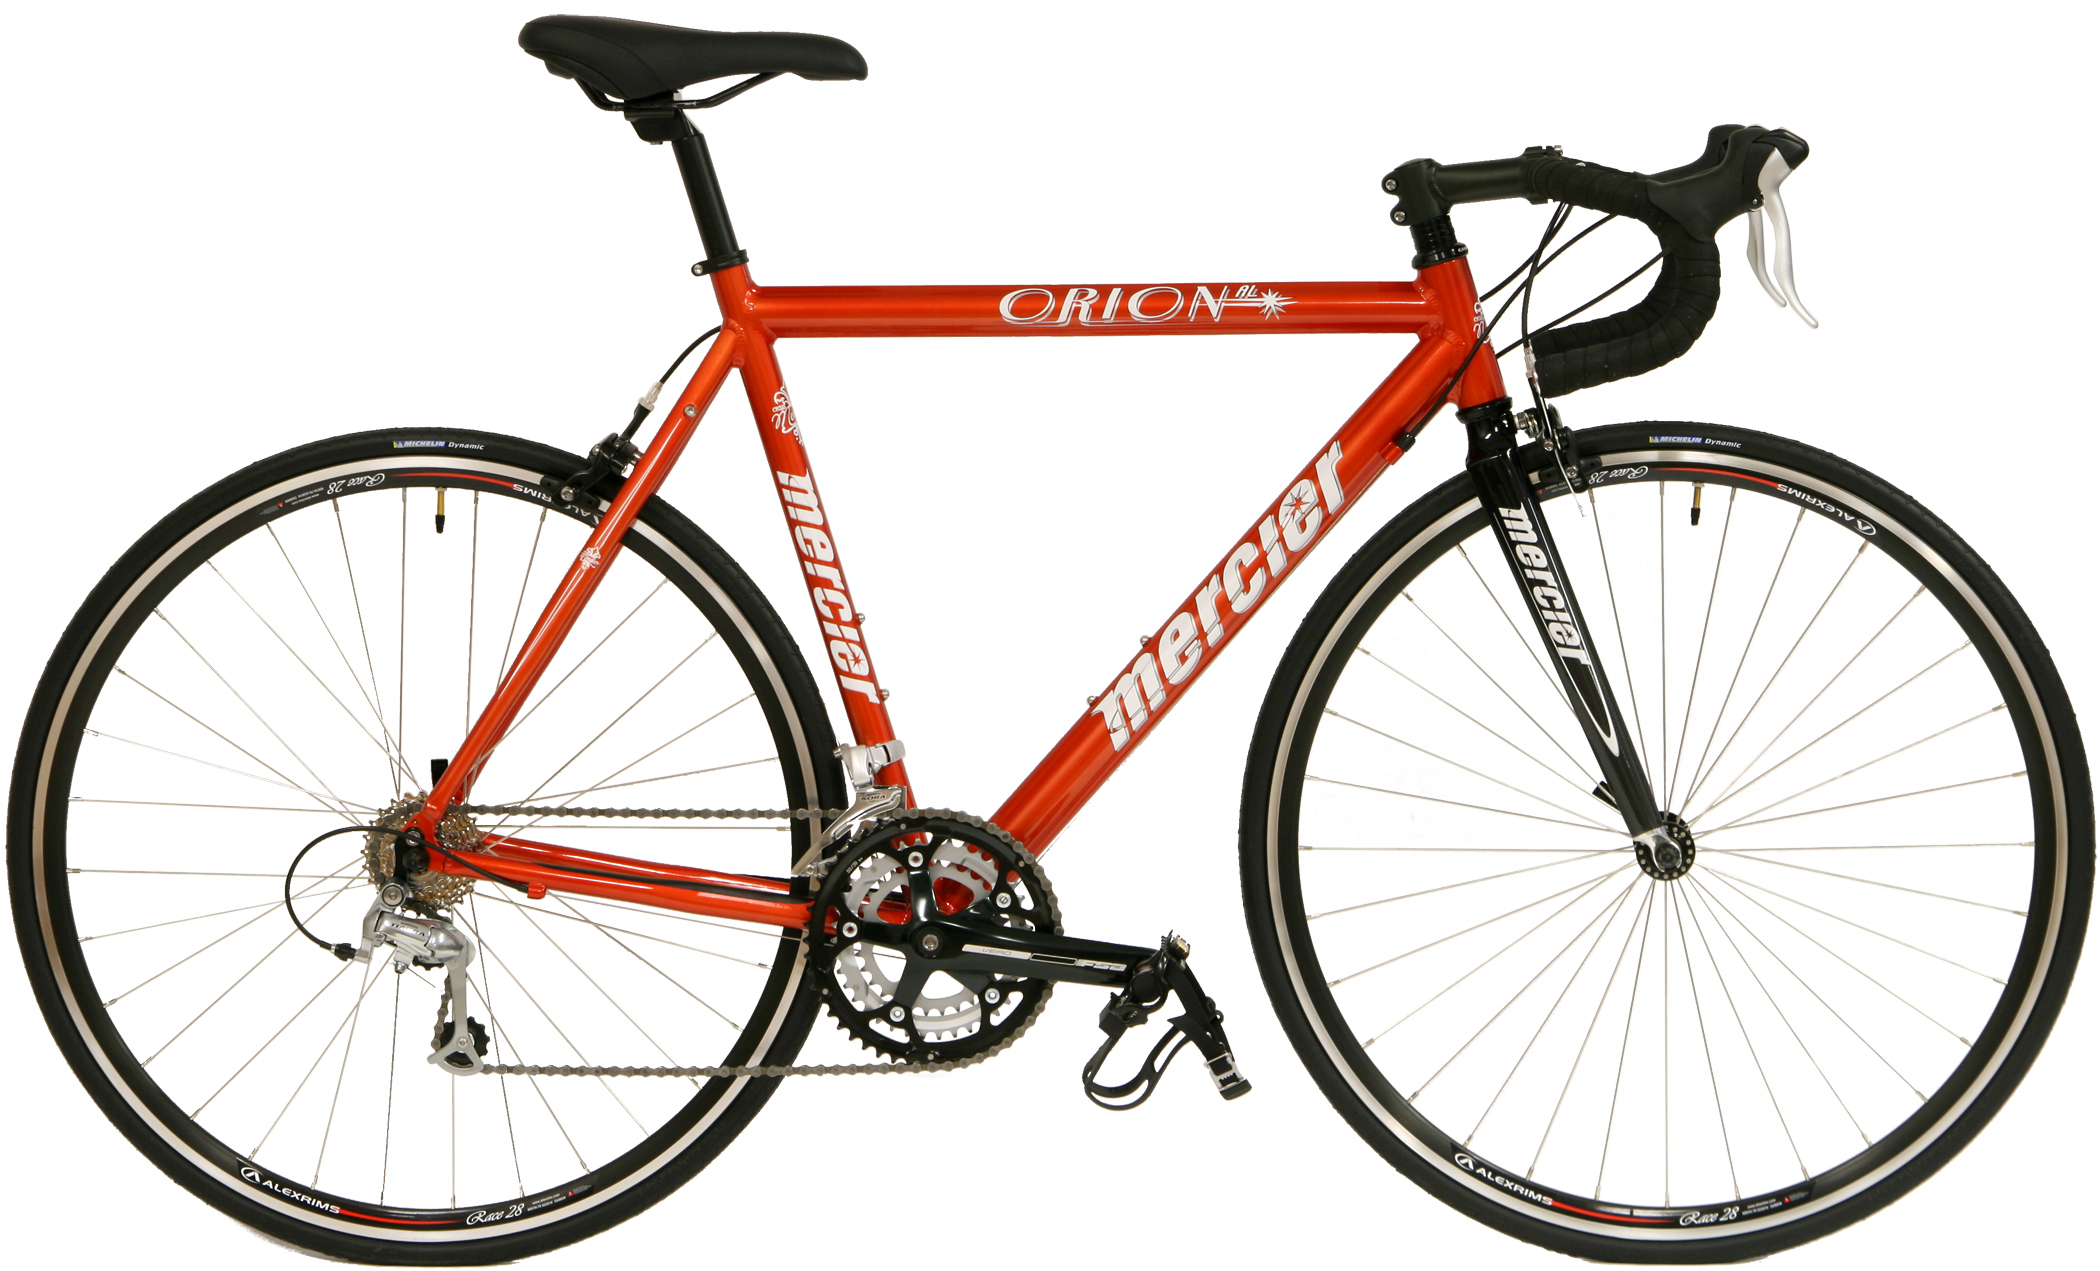 Steadily shipbuilding chemicals Save up to 60% off new Road Bikes, Roadbikes - 2013 Mercier Orion AL